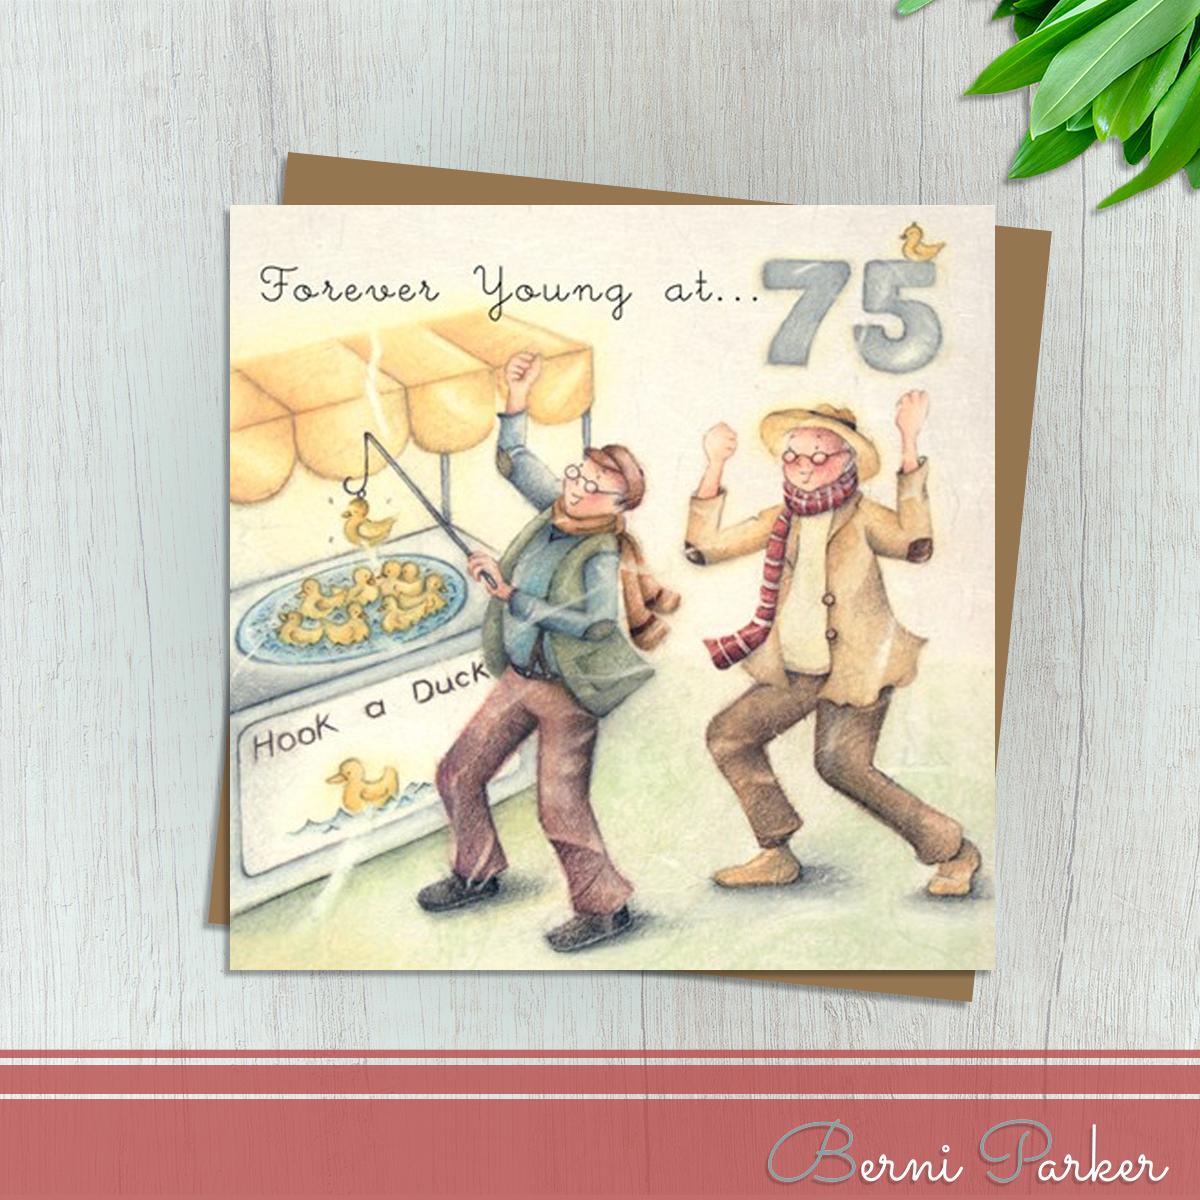 Showing Two Men Playing Hook The Duck At The Fairground. Caption: Forever Young At 75. Blank Inside For Your Own Message. Complete With Brown Kraft Envelope